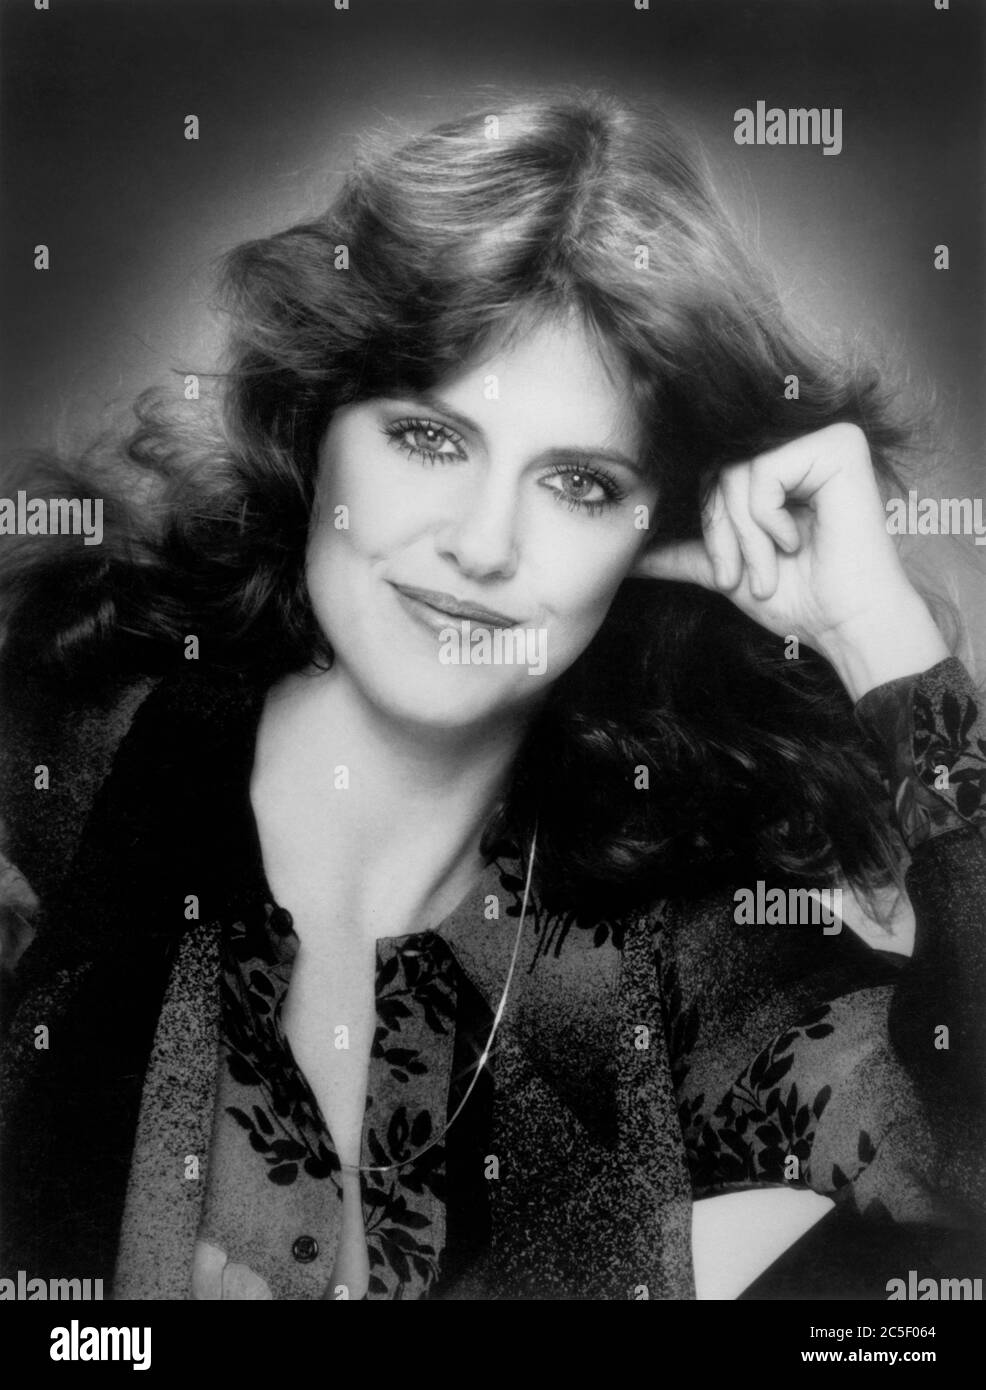 Actress Pam Dawber, Head and Shoulders Publicity Portrait for the Comedy TV Series 'Mork & Mindy', ABC-TV, 1980 Stock Photo